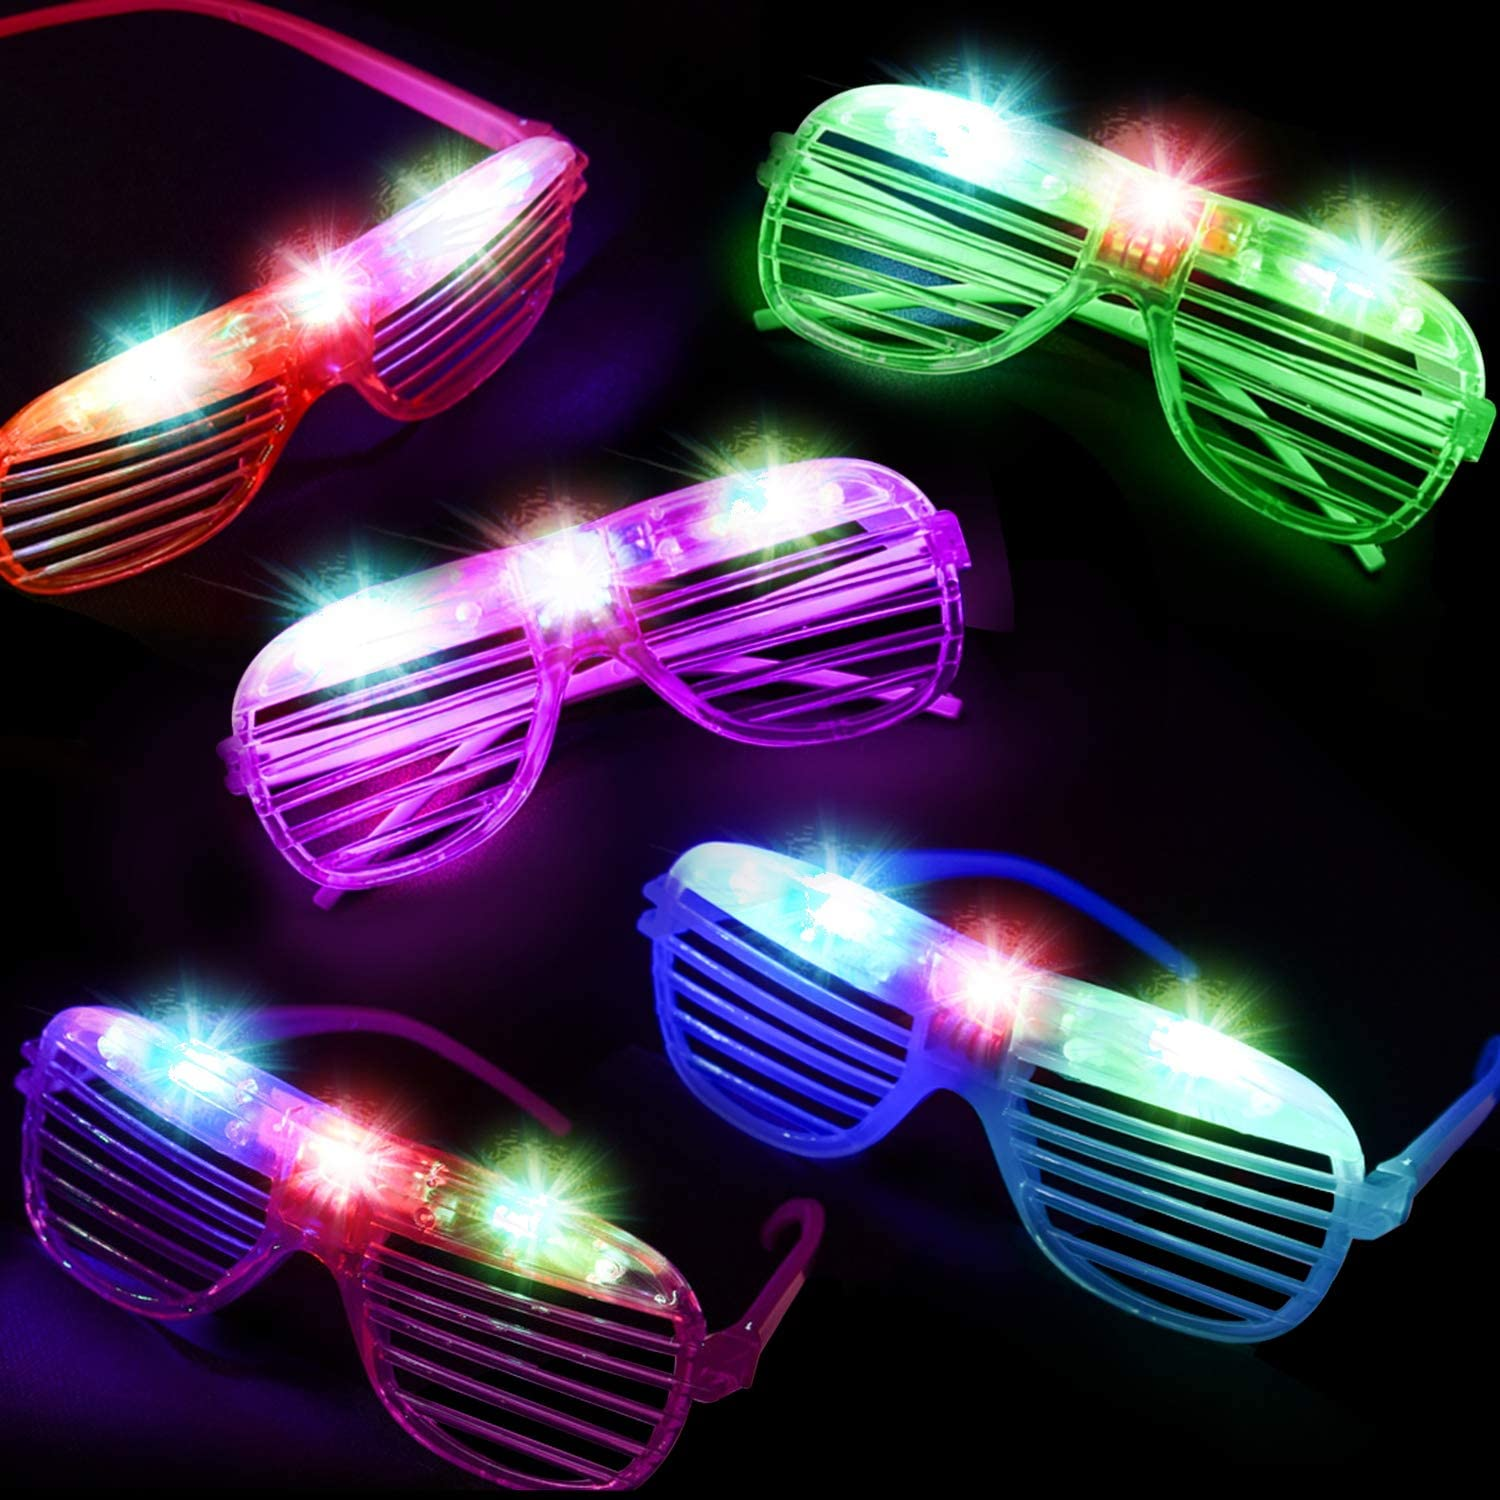 LED Glasses Glow in the Dark Party Favors Supplies for Kids 24 Pack Flashing Plastic Light Up Glasses Toys Bulk 3 Replaceable Battery Flashing Light fit Concert Birthday Holiday 